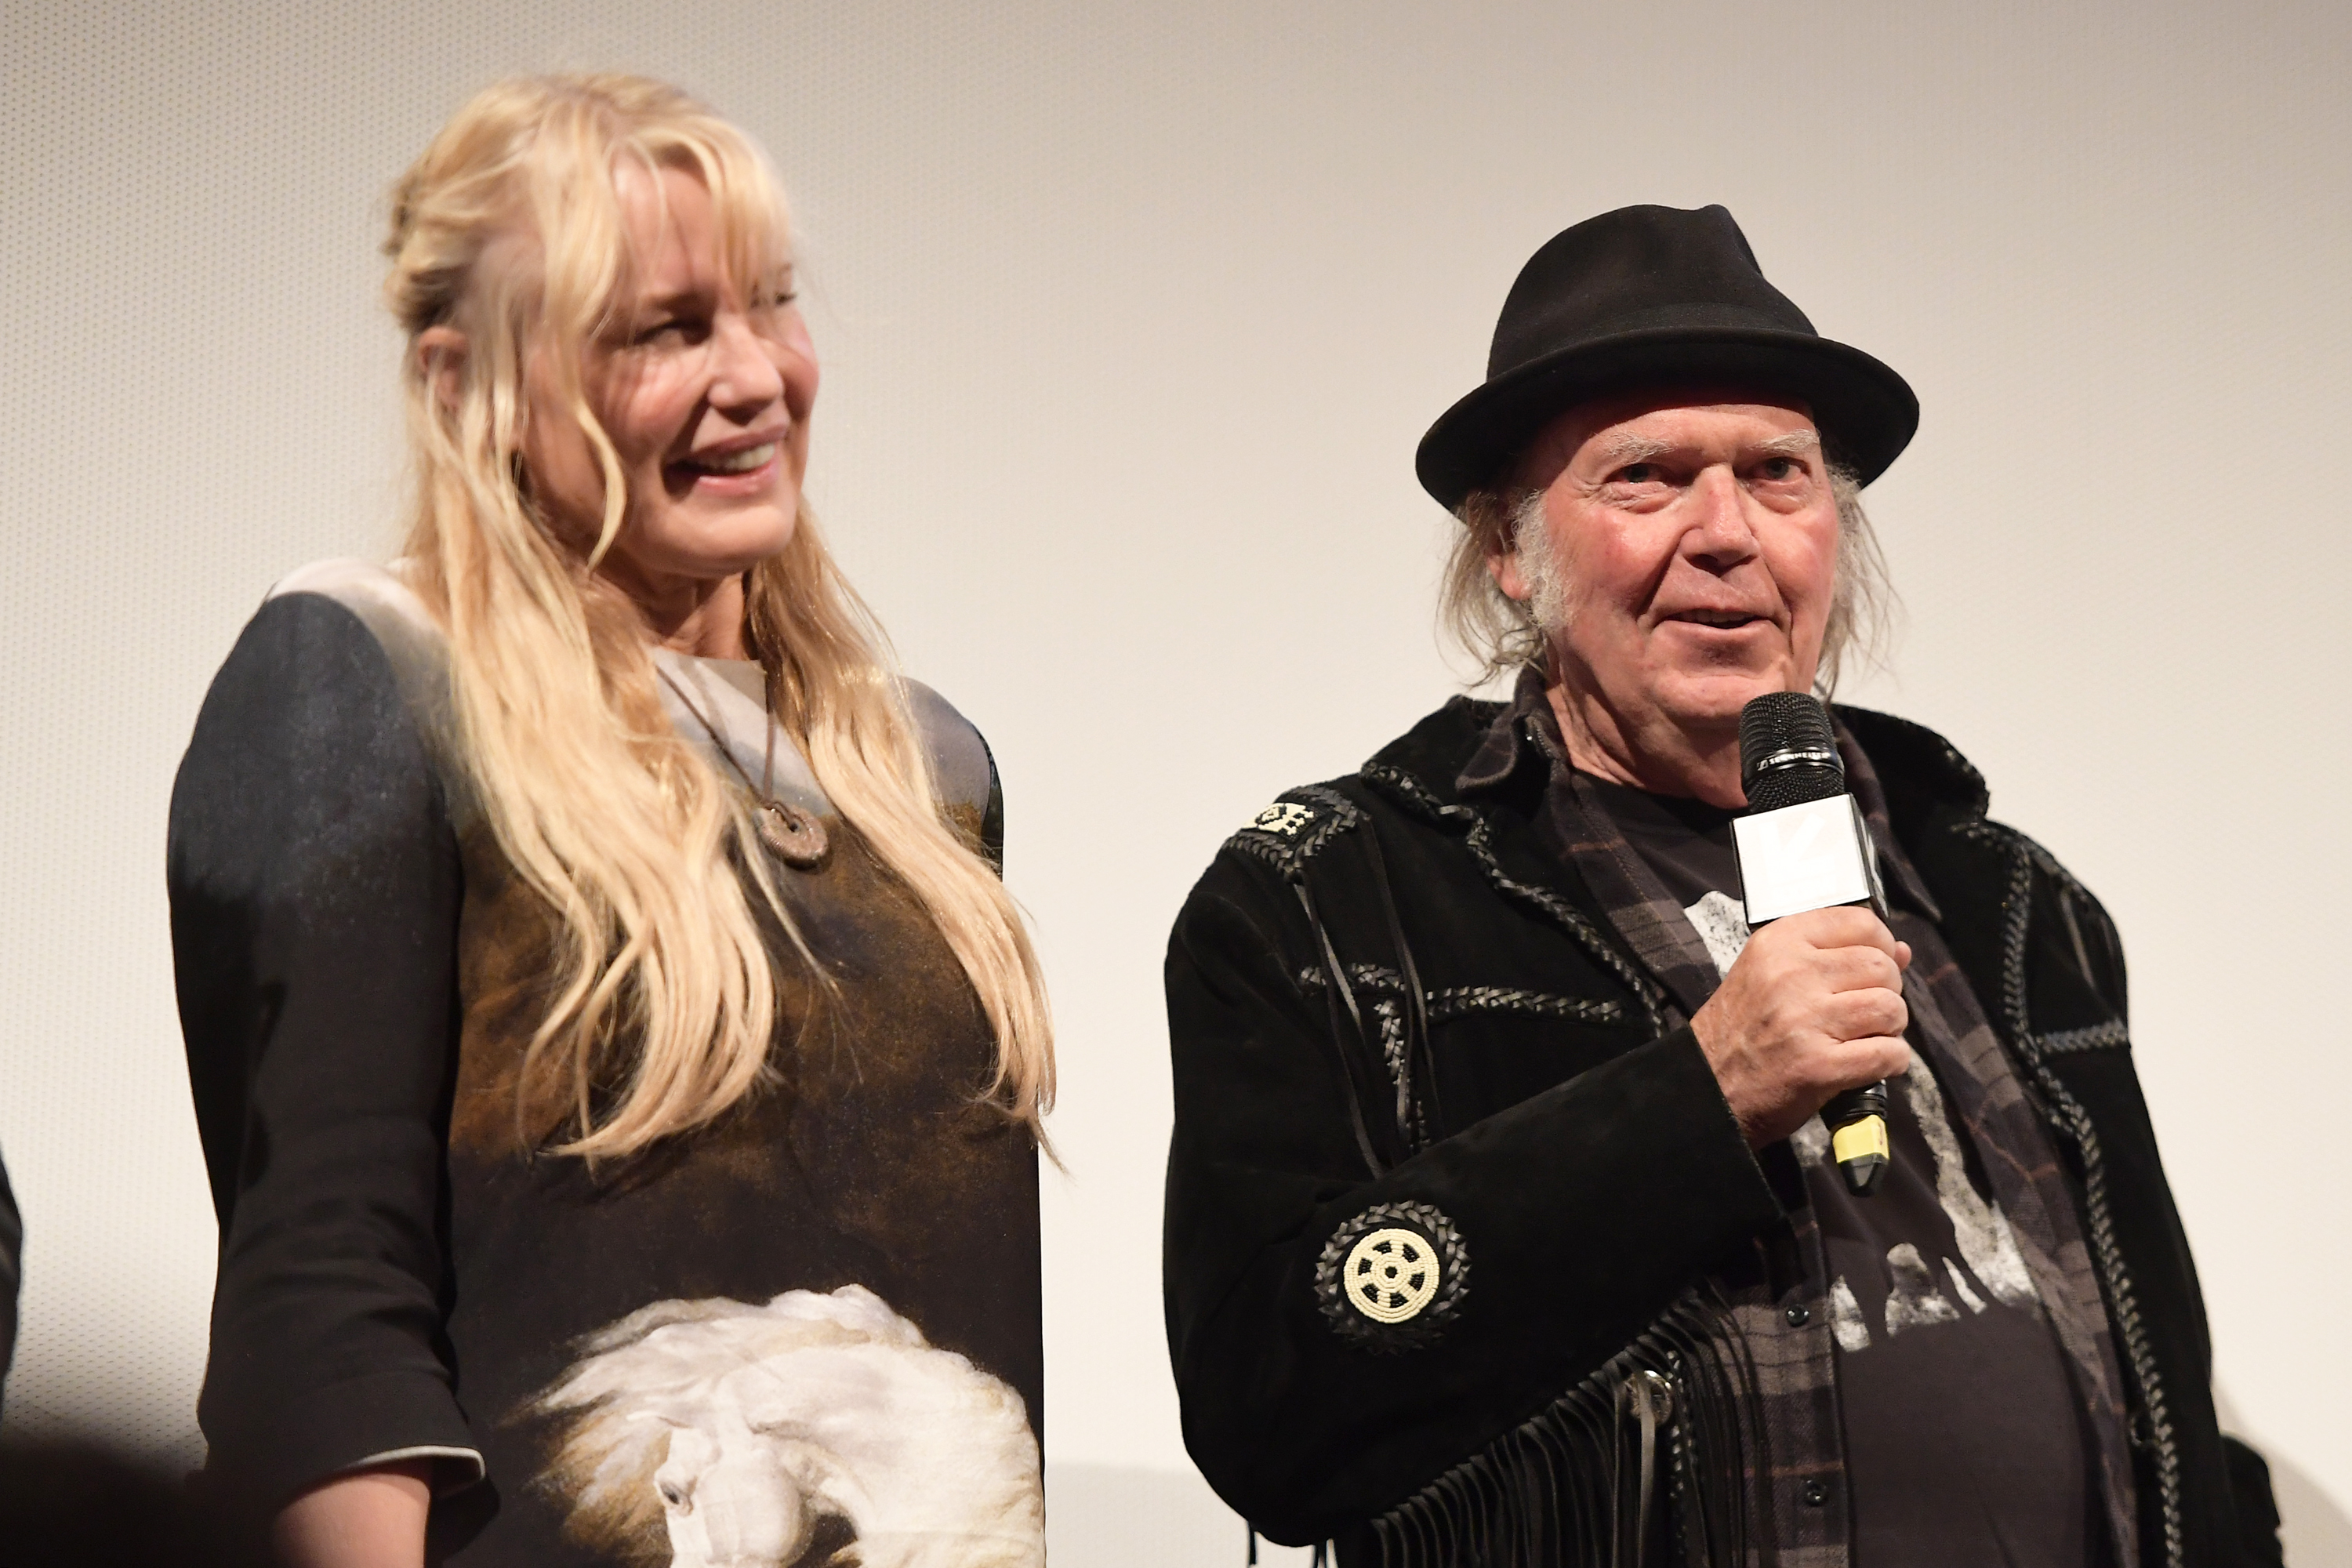 Daryl Hannah and Neil Young at the "Paradox" Premiere during the 2018 SXSW Conference and Festivals on March 15, 2018, in Austin, Texas. | Source: Getty Images